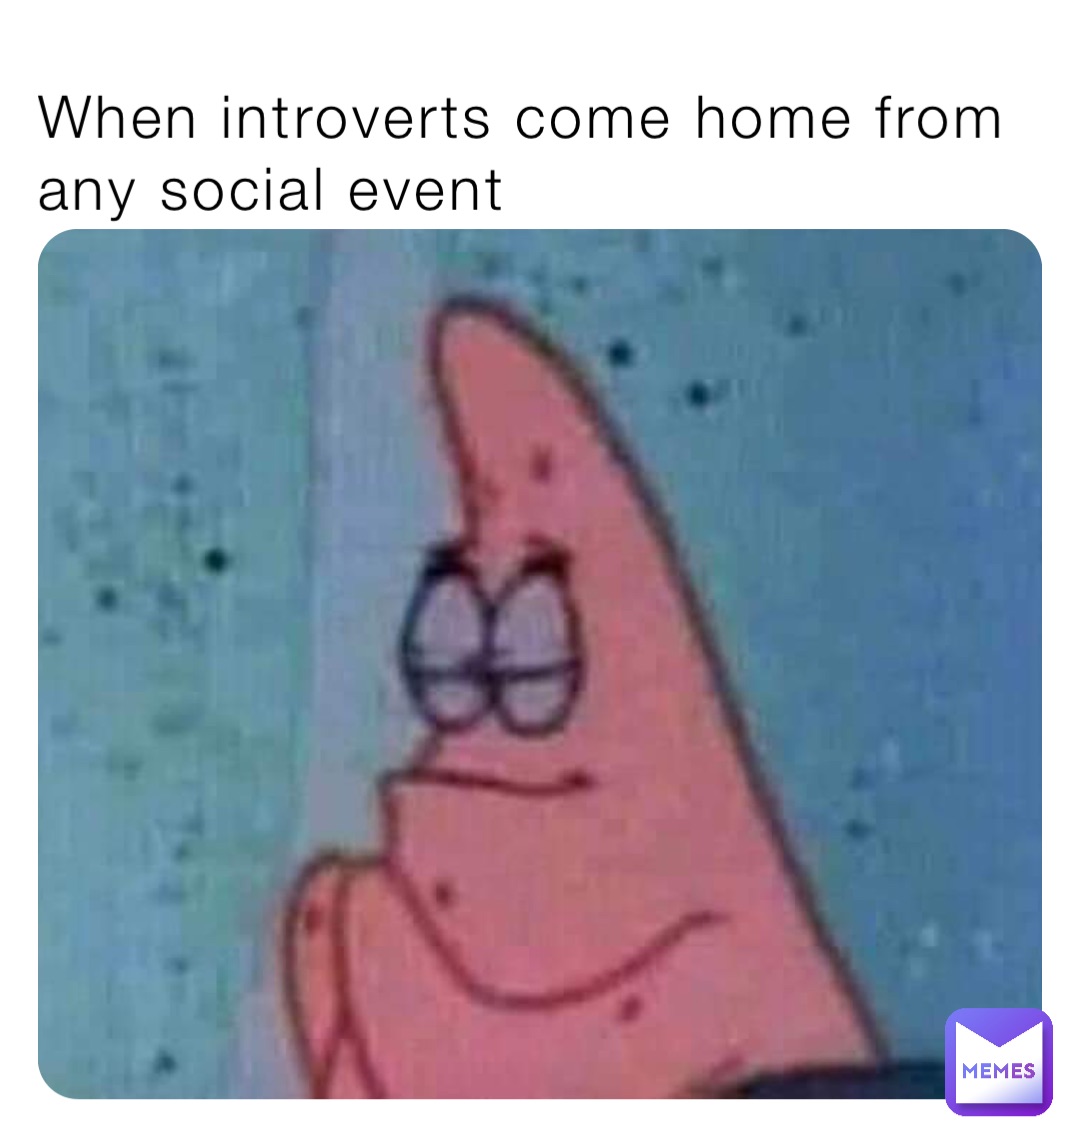 When introverts come home from any social event